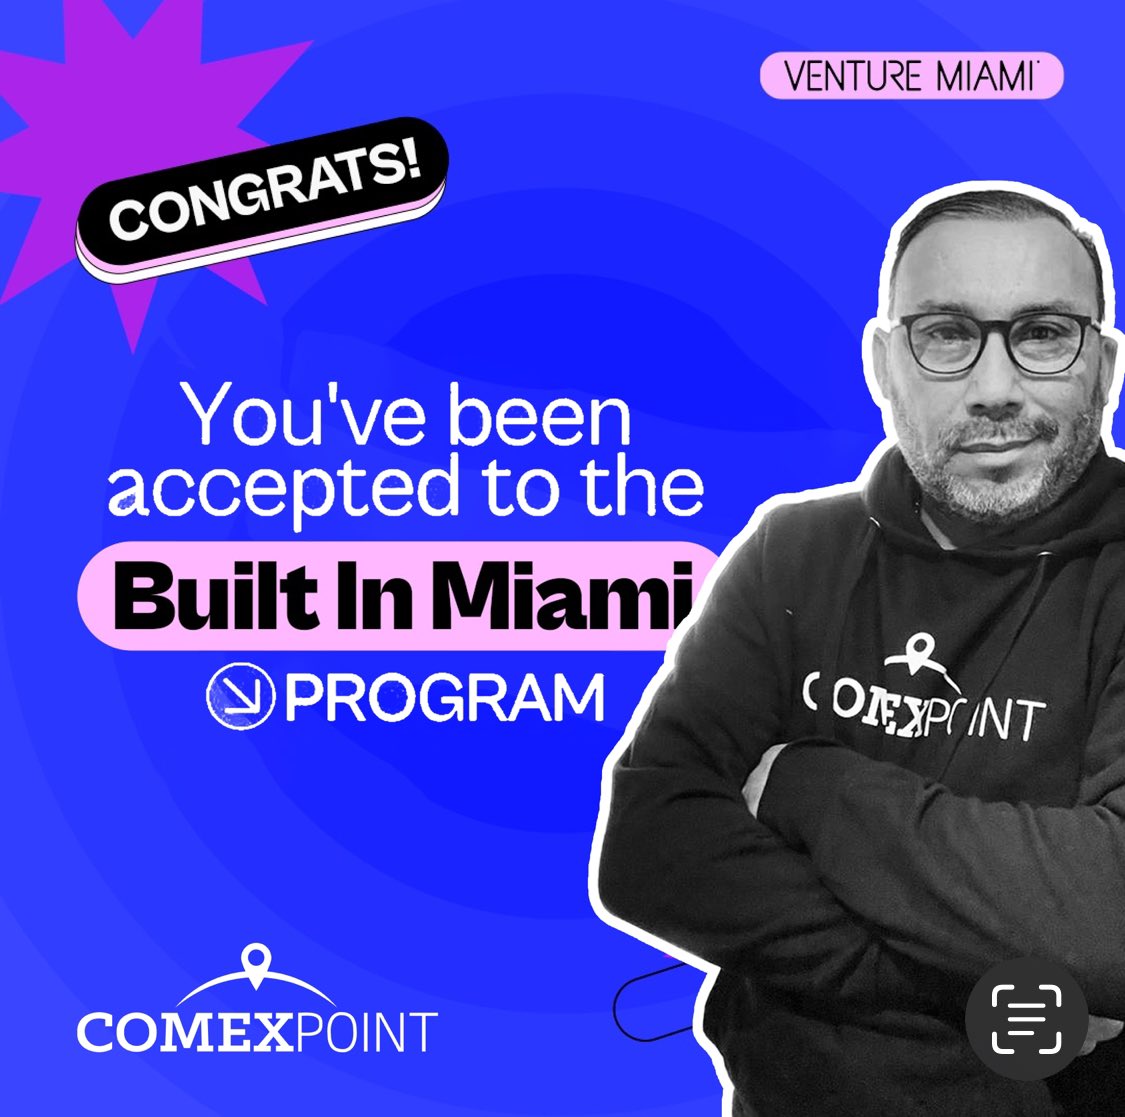 We are very exited and happy because we have been accepted in #BuiltInMiami startups program #comexpoint #makethingshappen